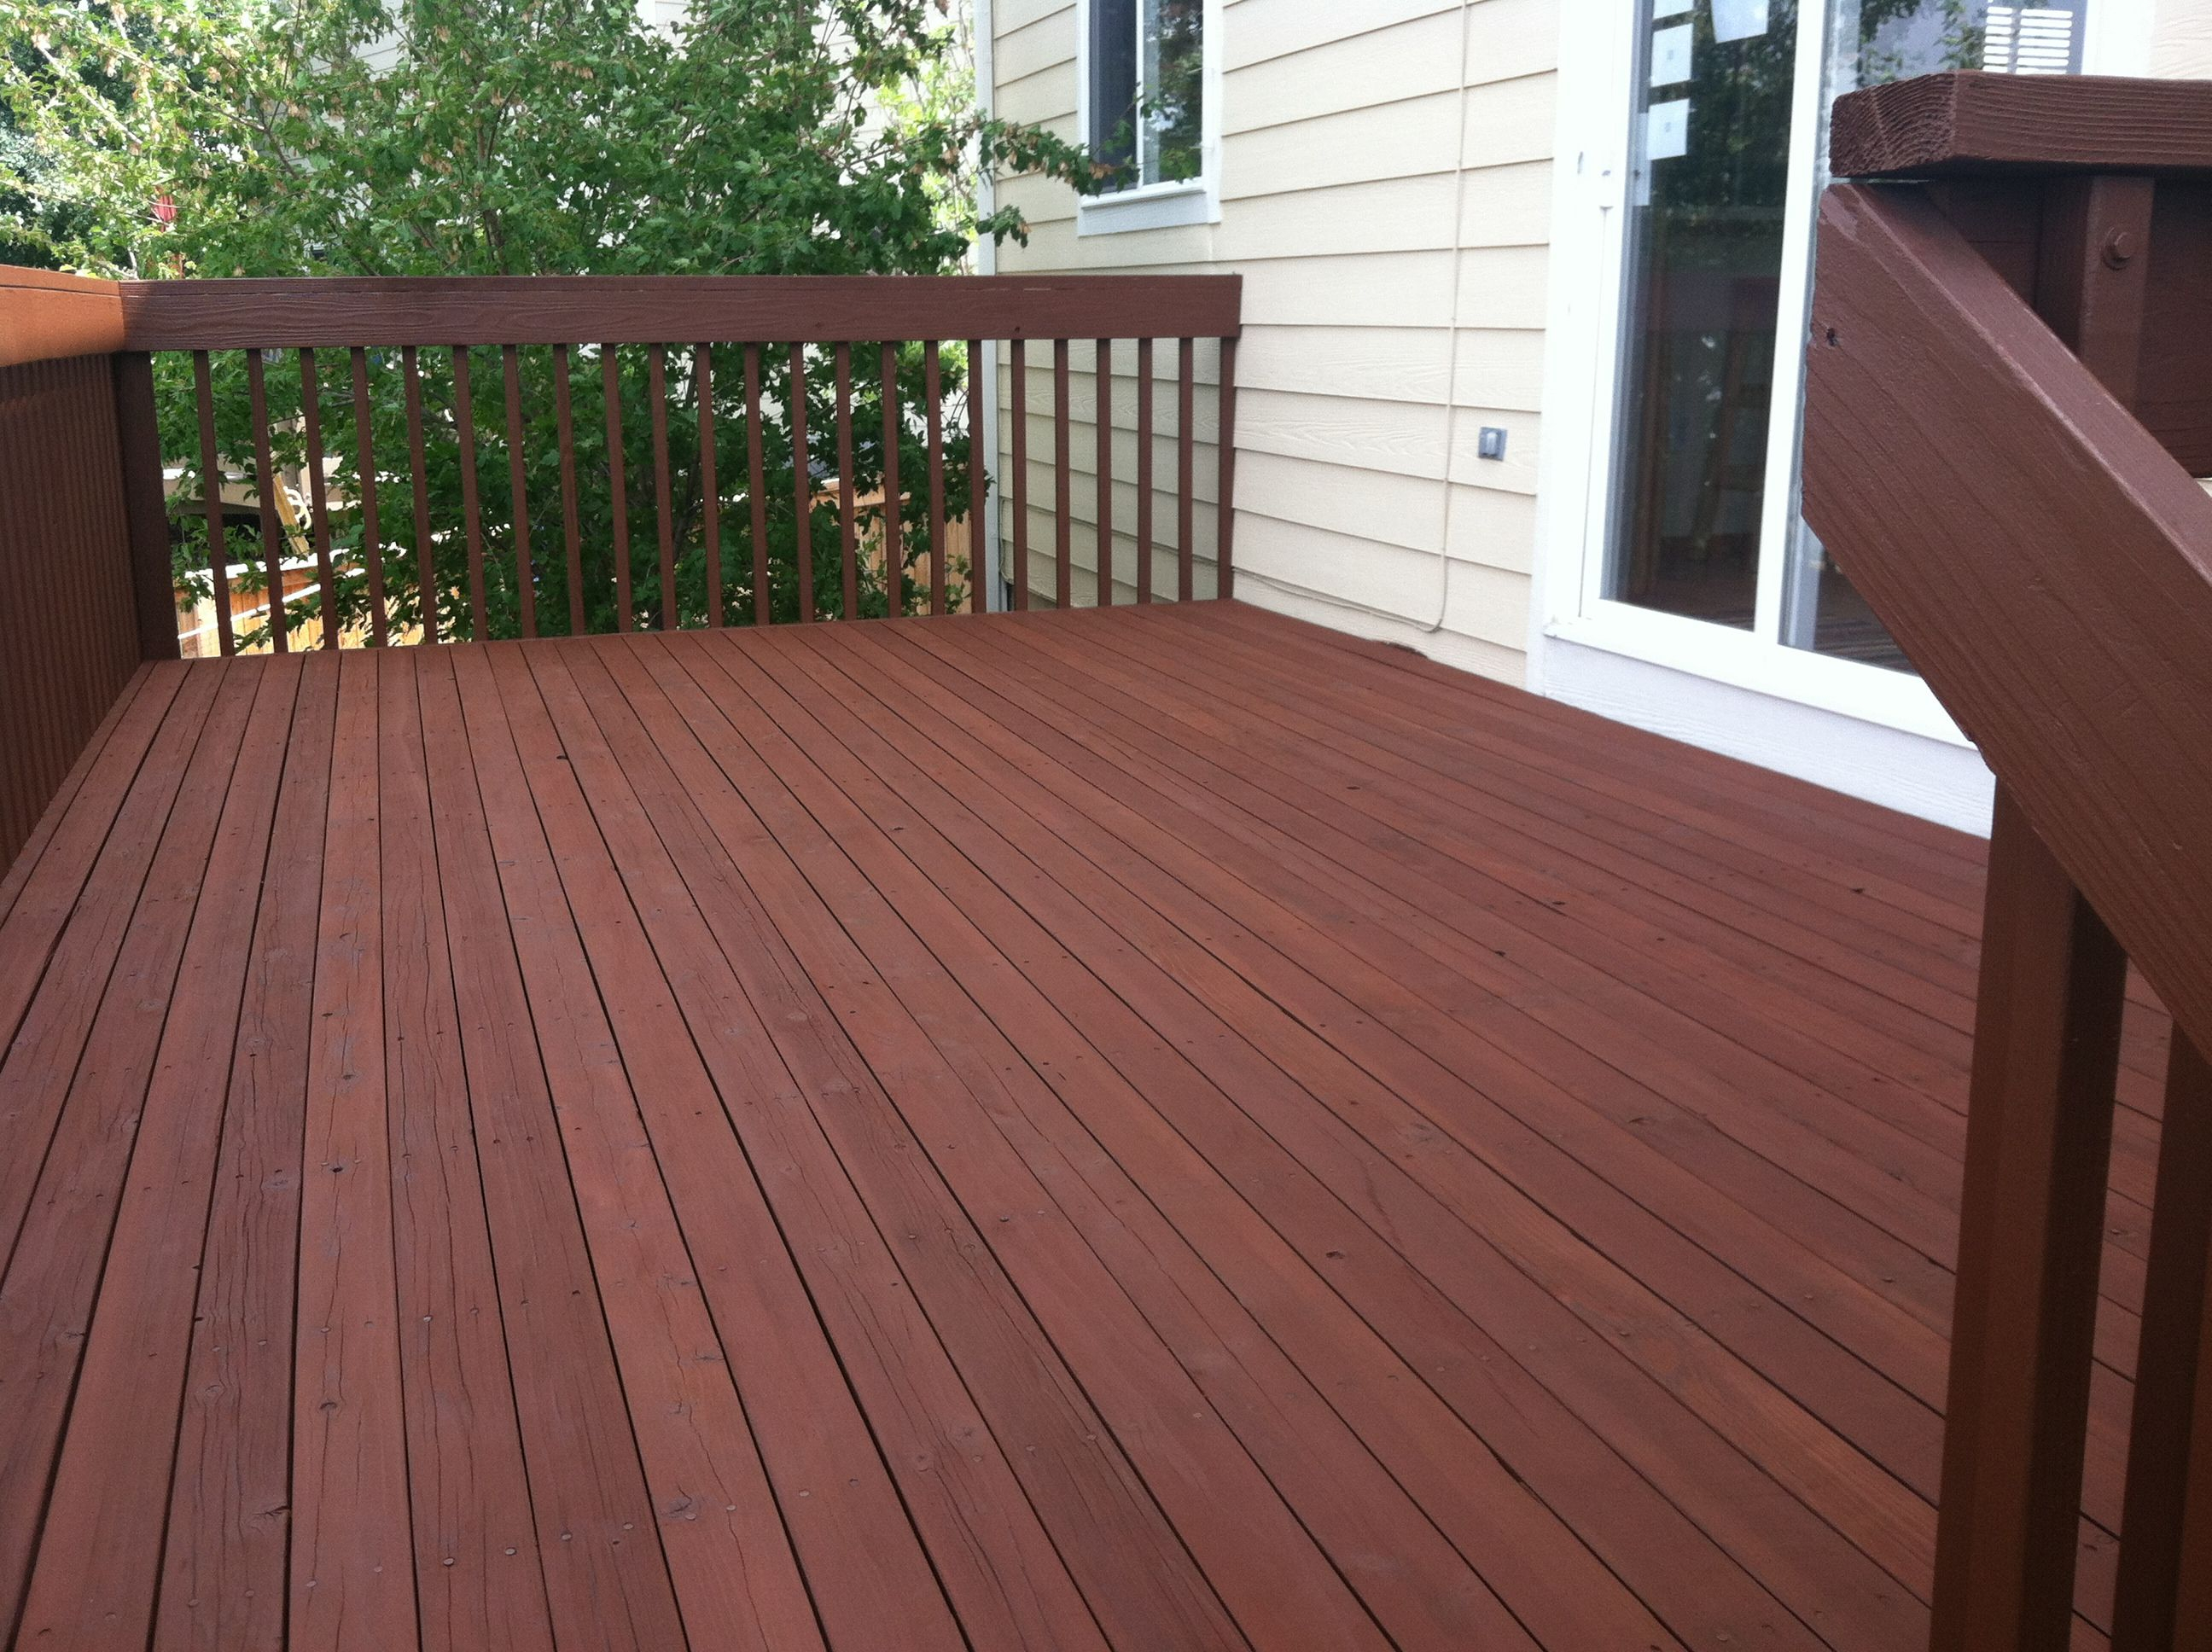 Cabot Deck Stain In Semi Solid Oak Brown Best Deck Stains In 2019 intended for size 2592 X 1936